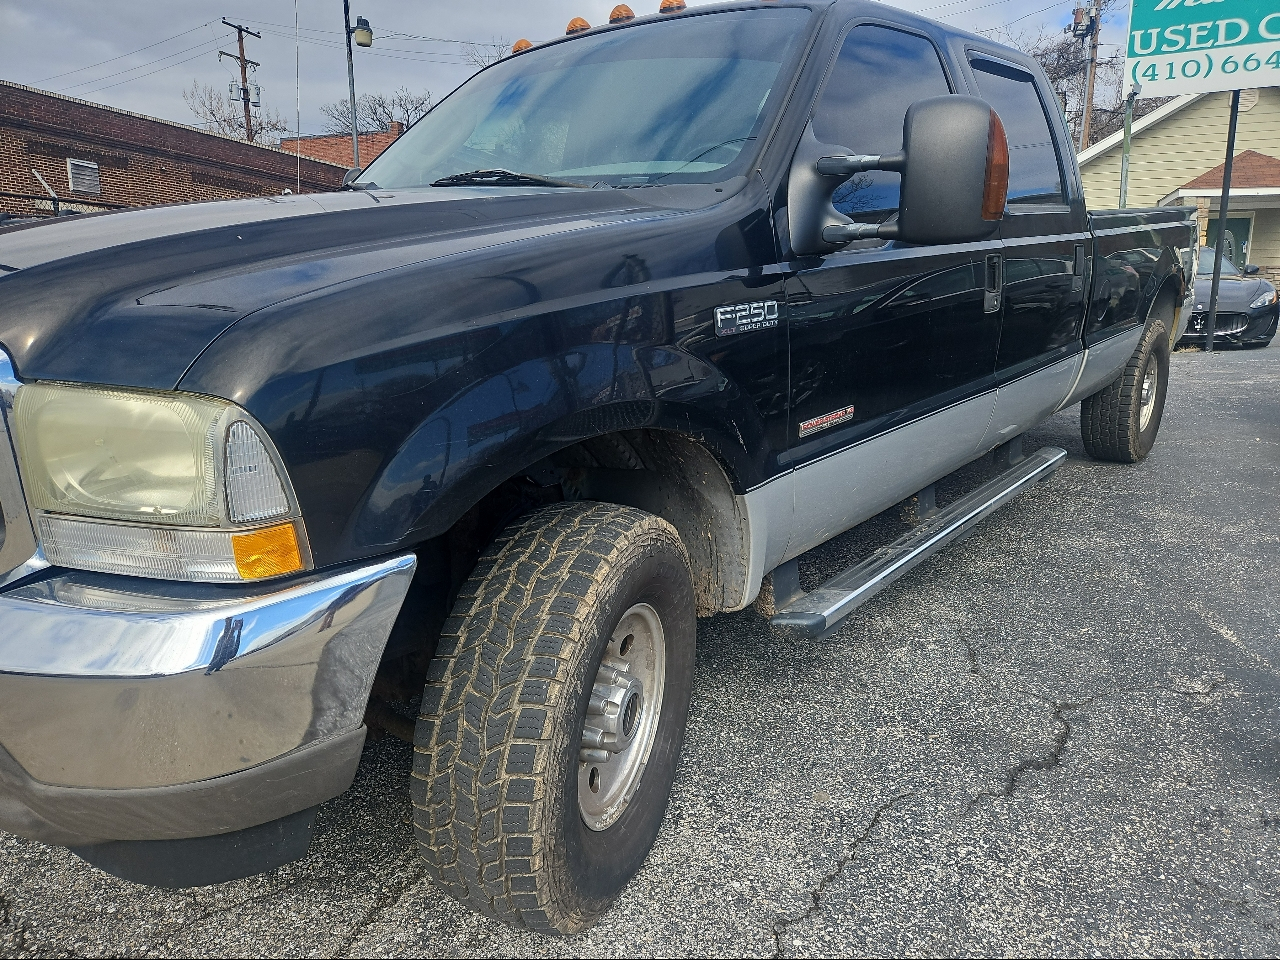 2004 Ford F-250 SD Lariat Crew Cab Long Bed 4WD